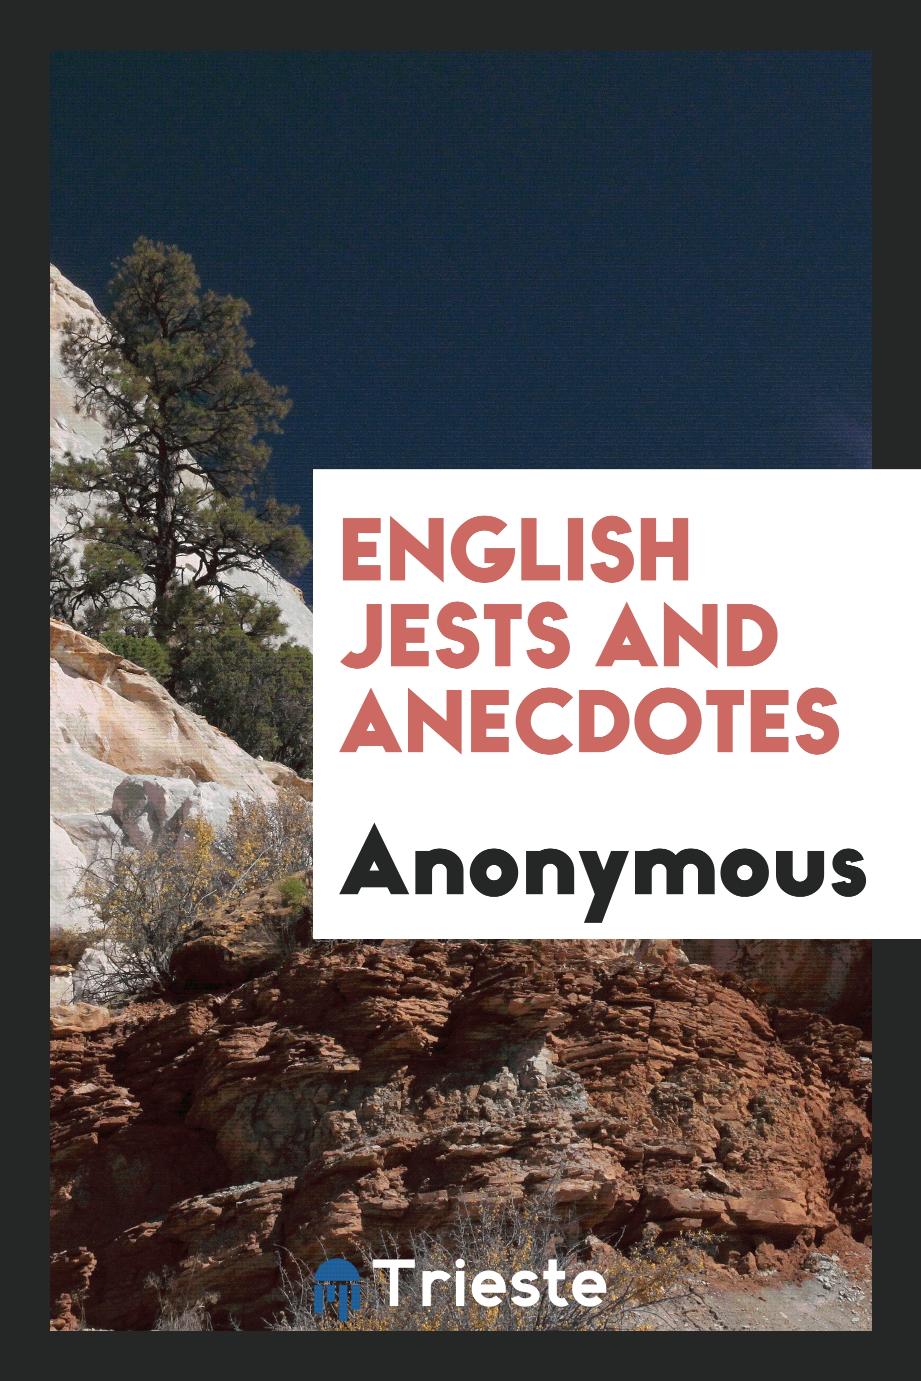 English jests and anecdotes